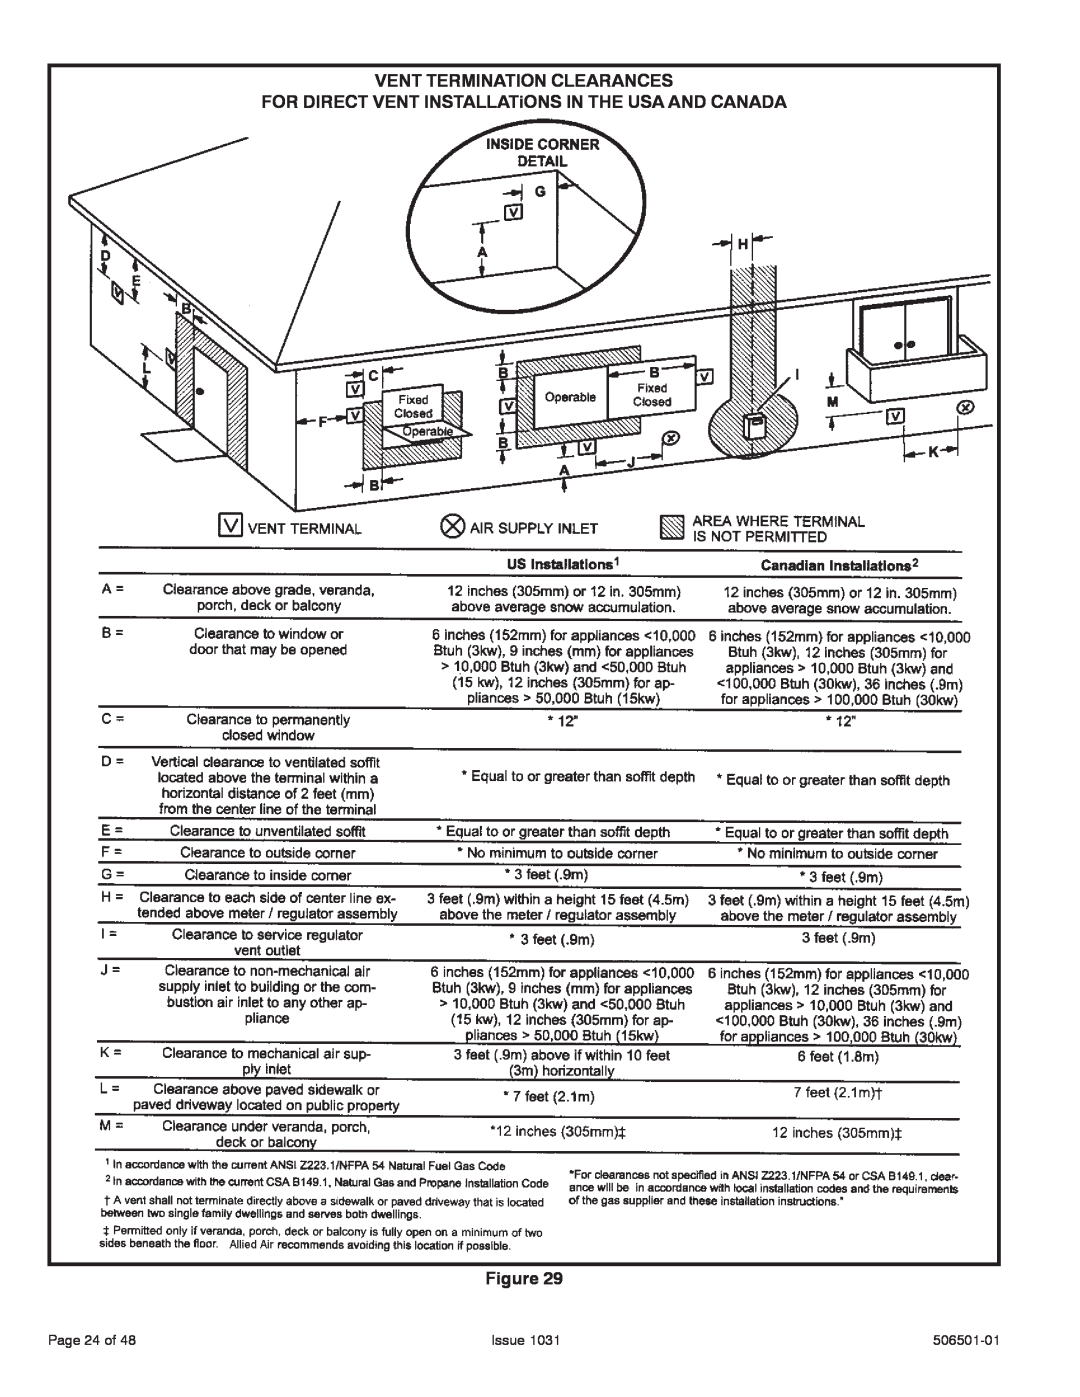 Allied Air Enterprises A95UH, 95G1UH, A93UH, 92G1UH Vent Termination Clearances, Page 24 of, Issue, 506501-01 